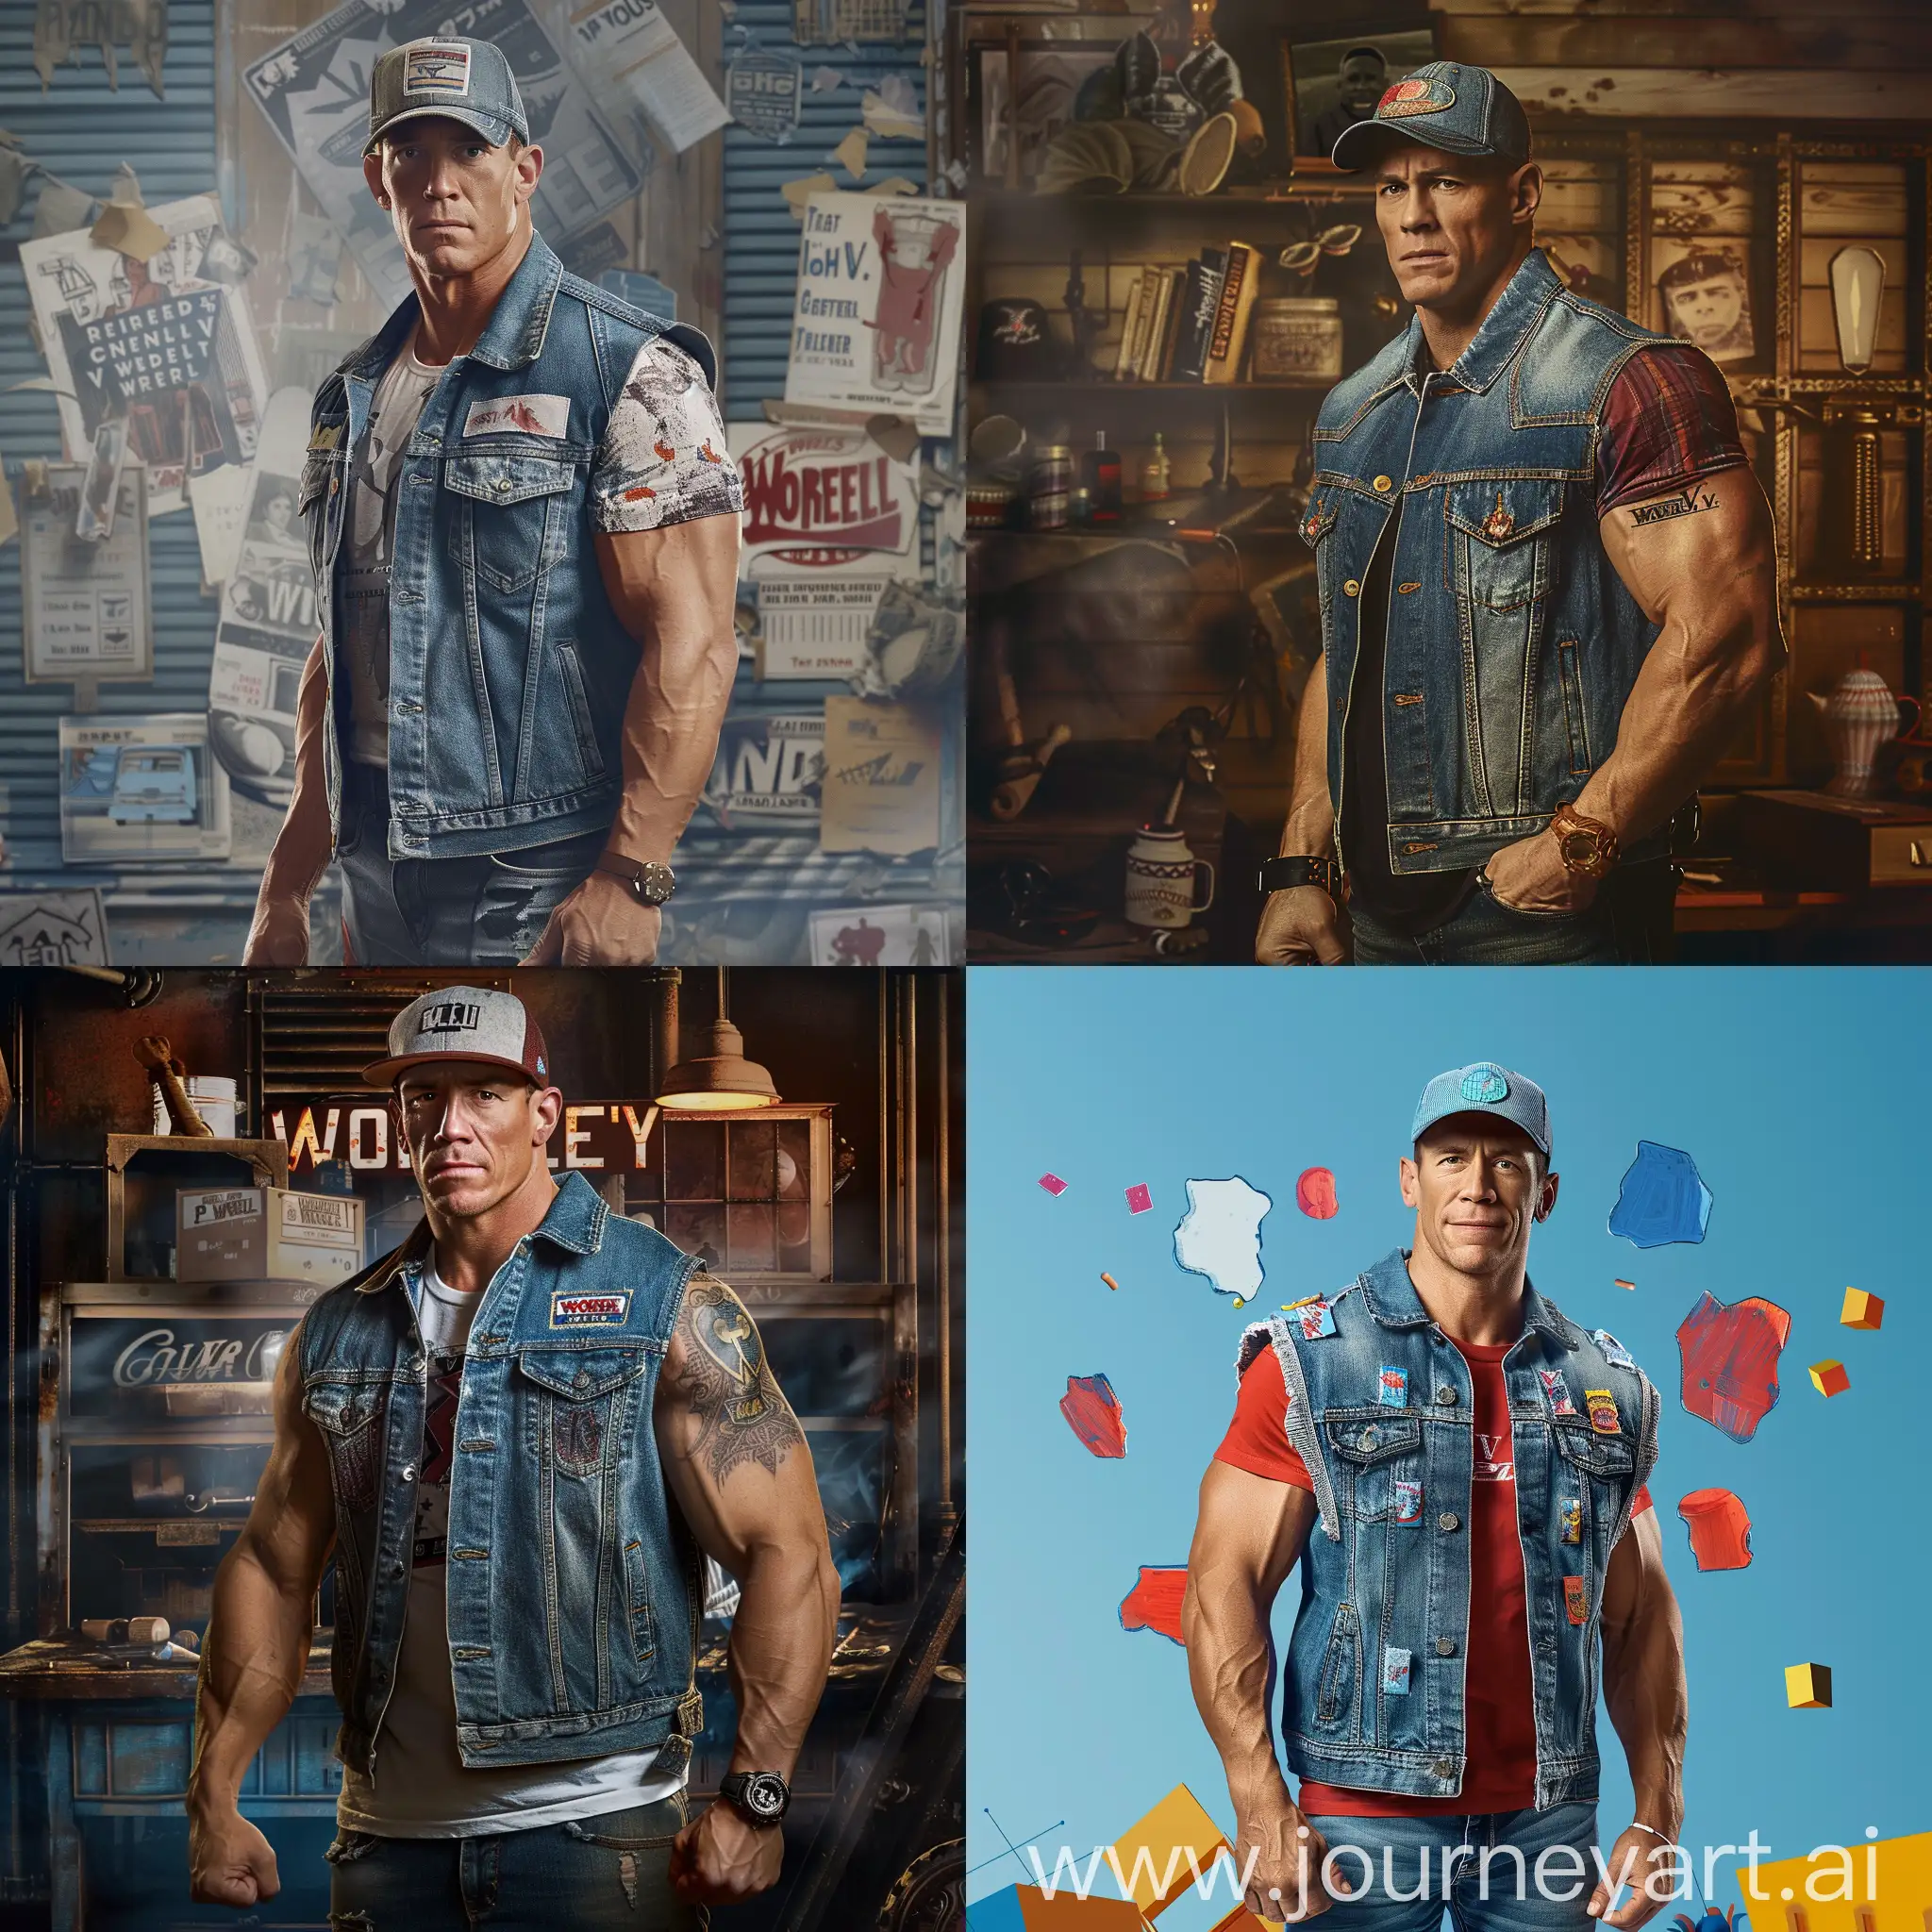 Create an image featuring John Cena as Jim V. Worrell, the son of the iconic character Ernest P. Worrell. Jim stands confidently, wearing Ernest's signature denim vest and a baseball cap, ready to carry on his father's legacy. Surround him with elements reminiscent of Ernest's adventures, evoking nostalgia and excitement for this new chapter in the Worrell saga.